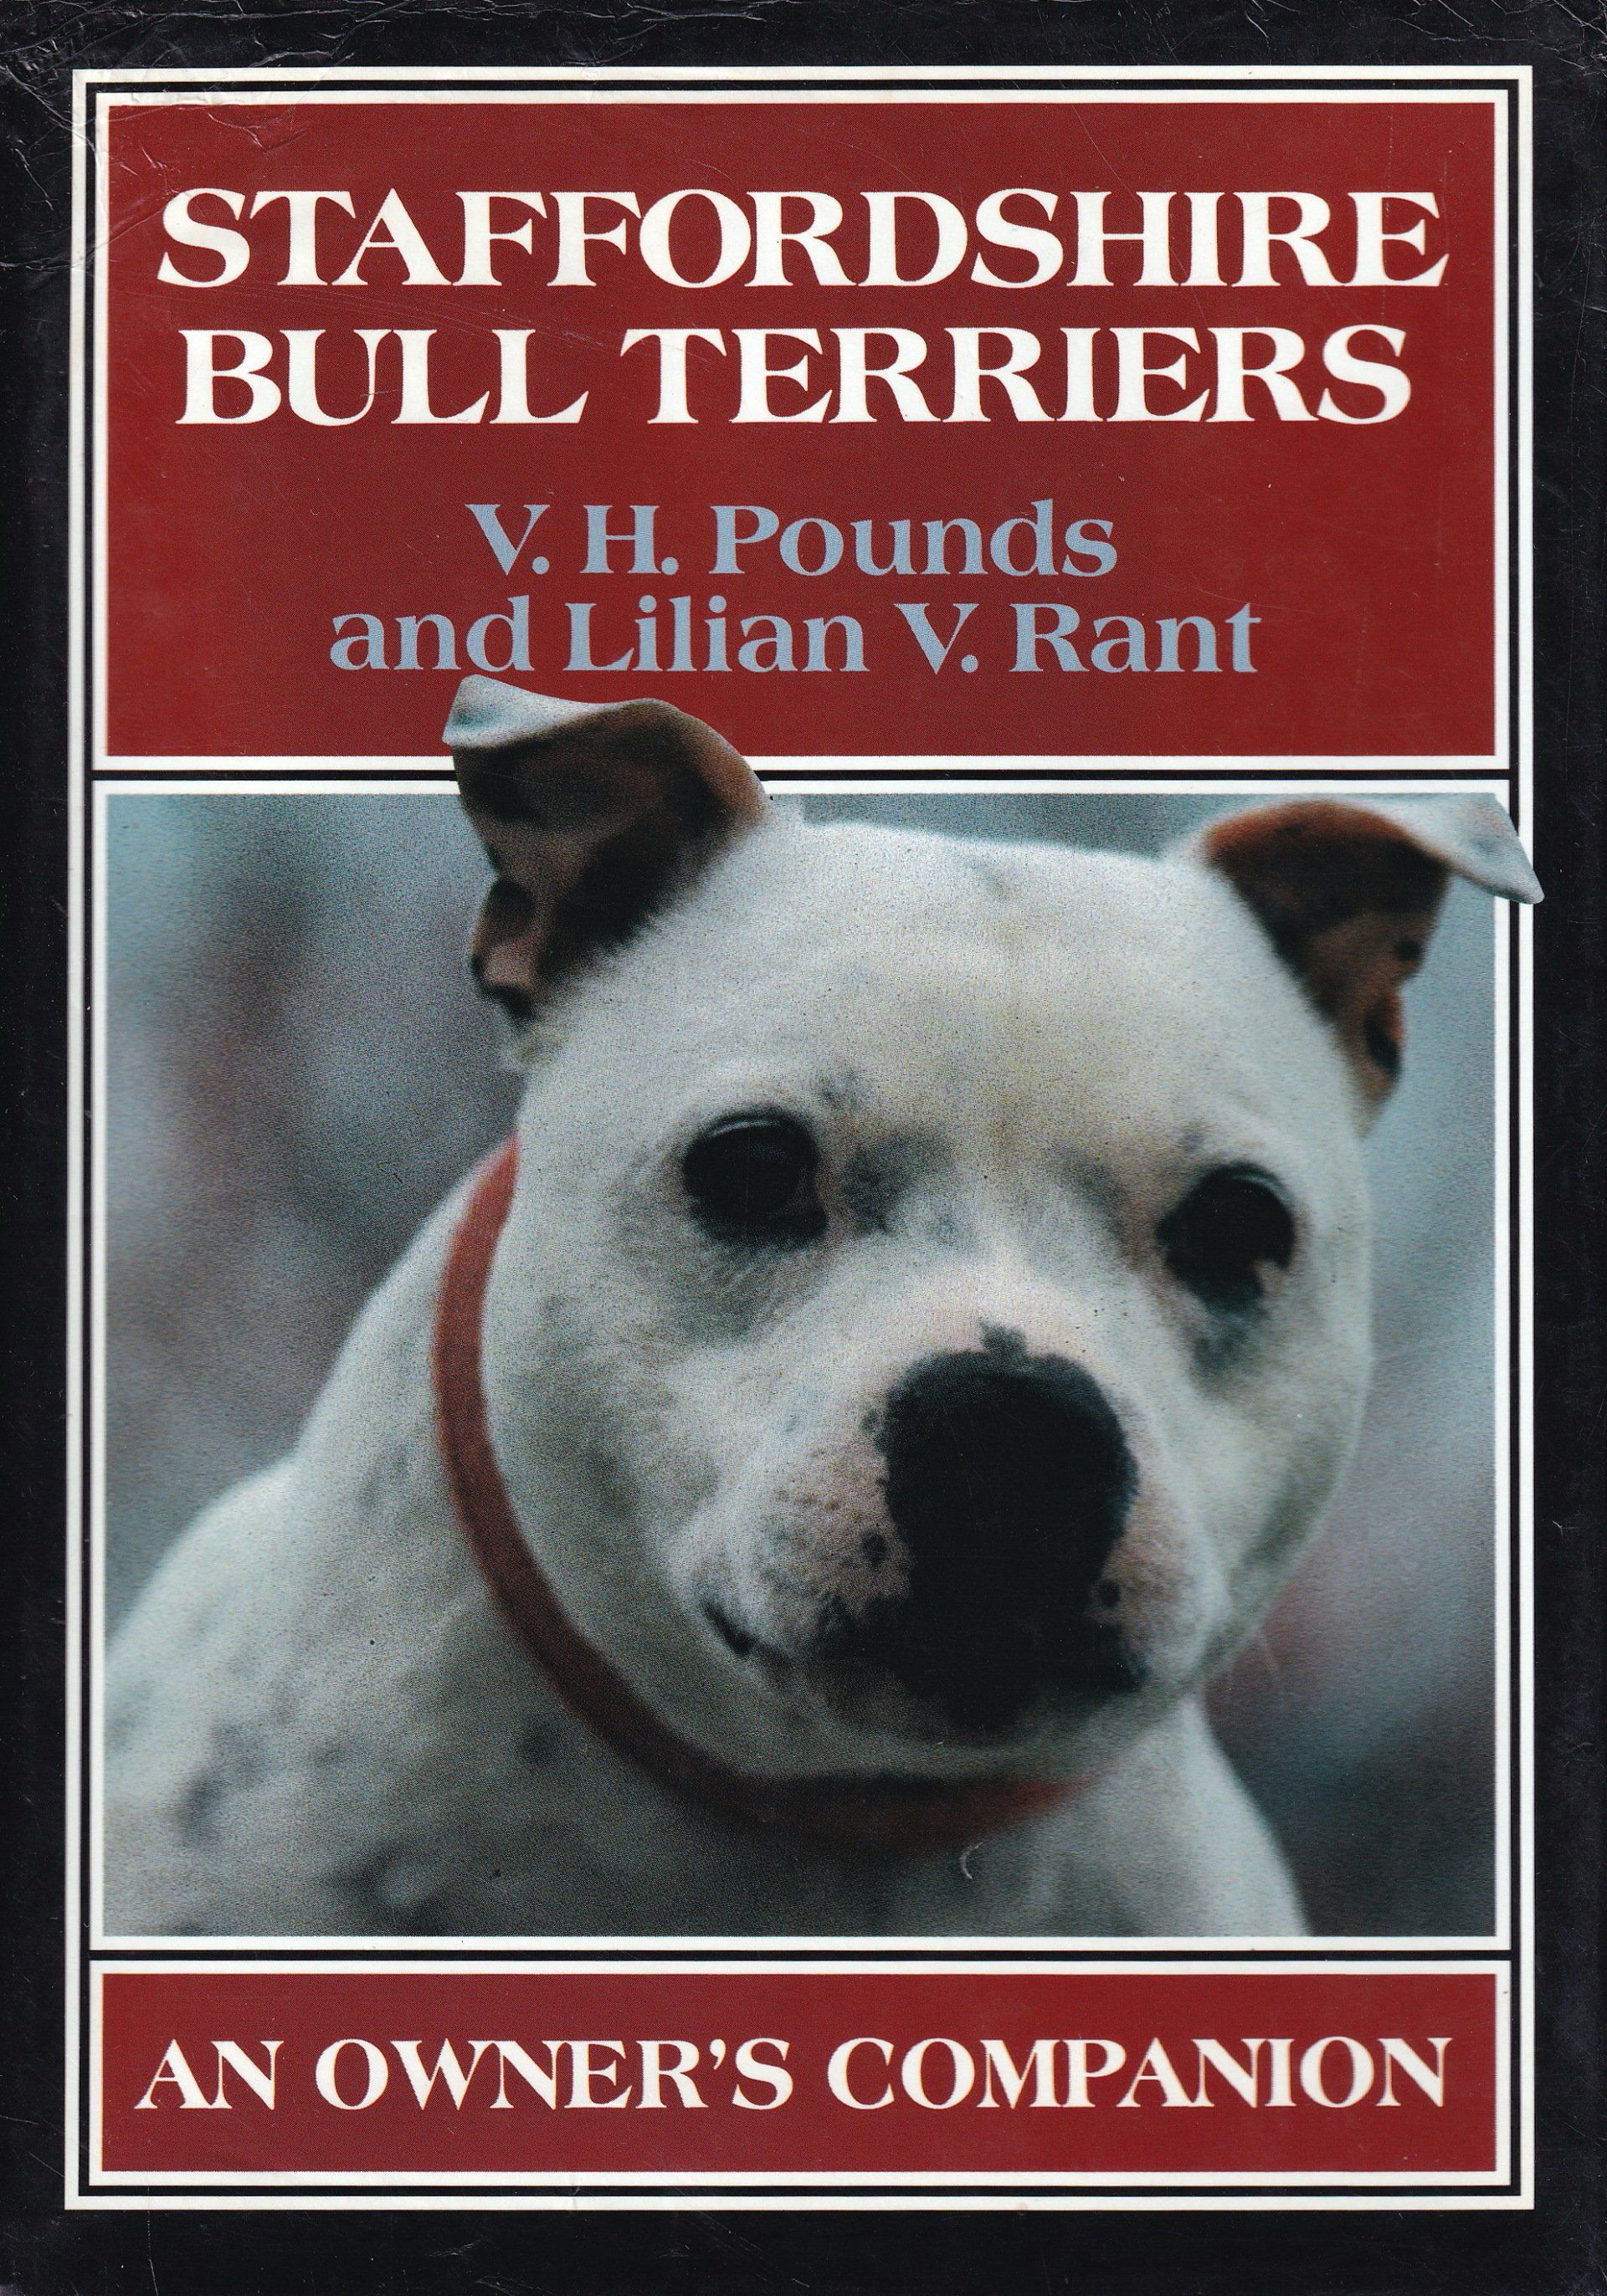 Staffordshire Bull Terriers (An Owner's Companion) by V H Pounds & Lilian V Rant